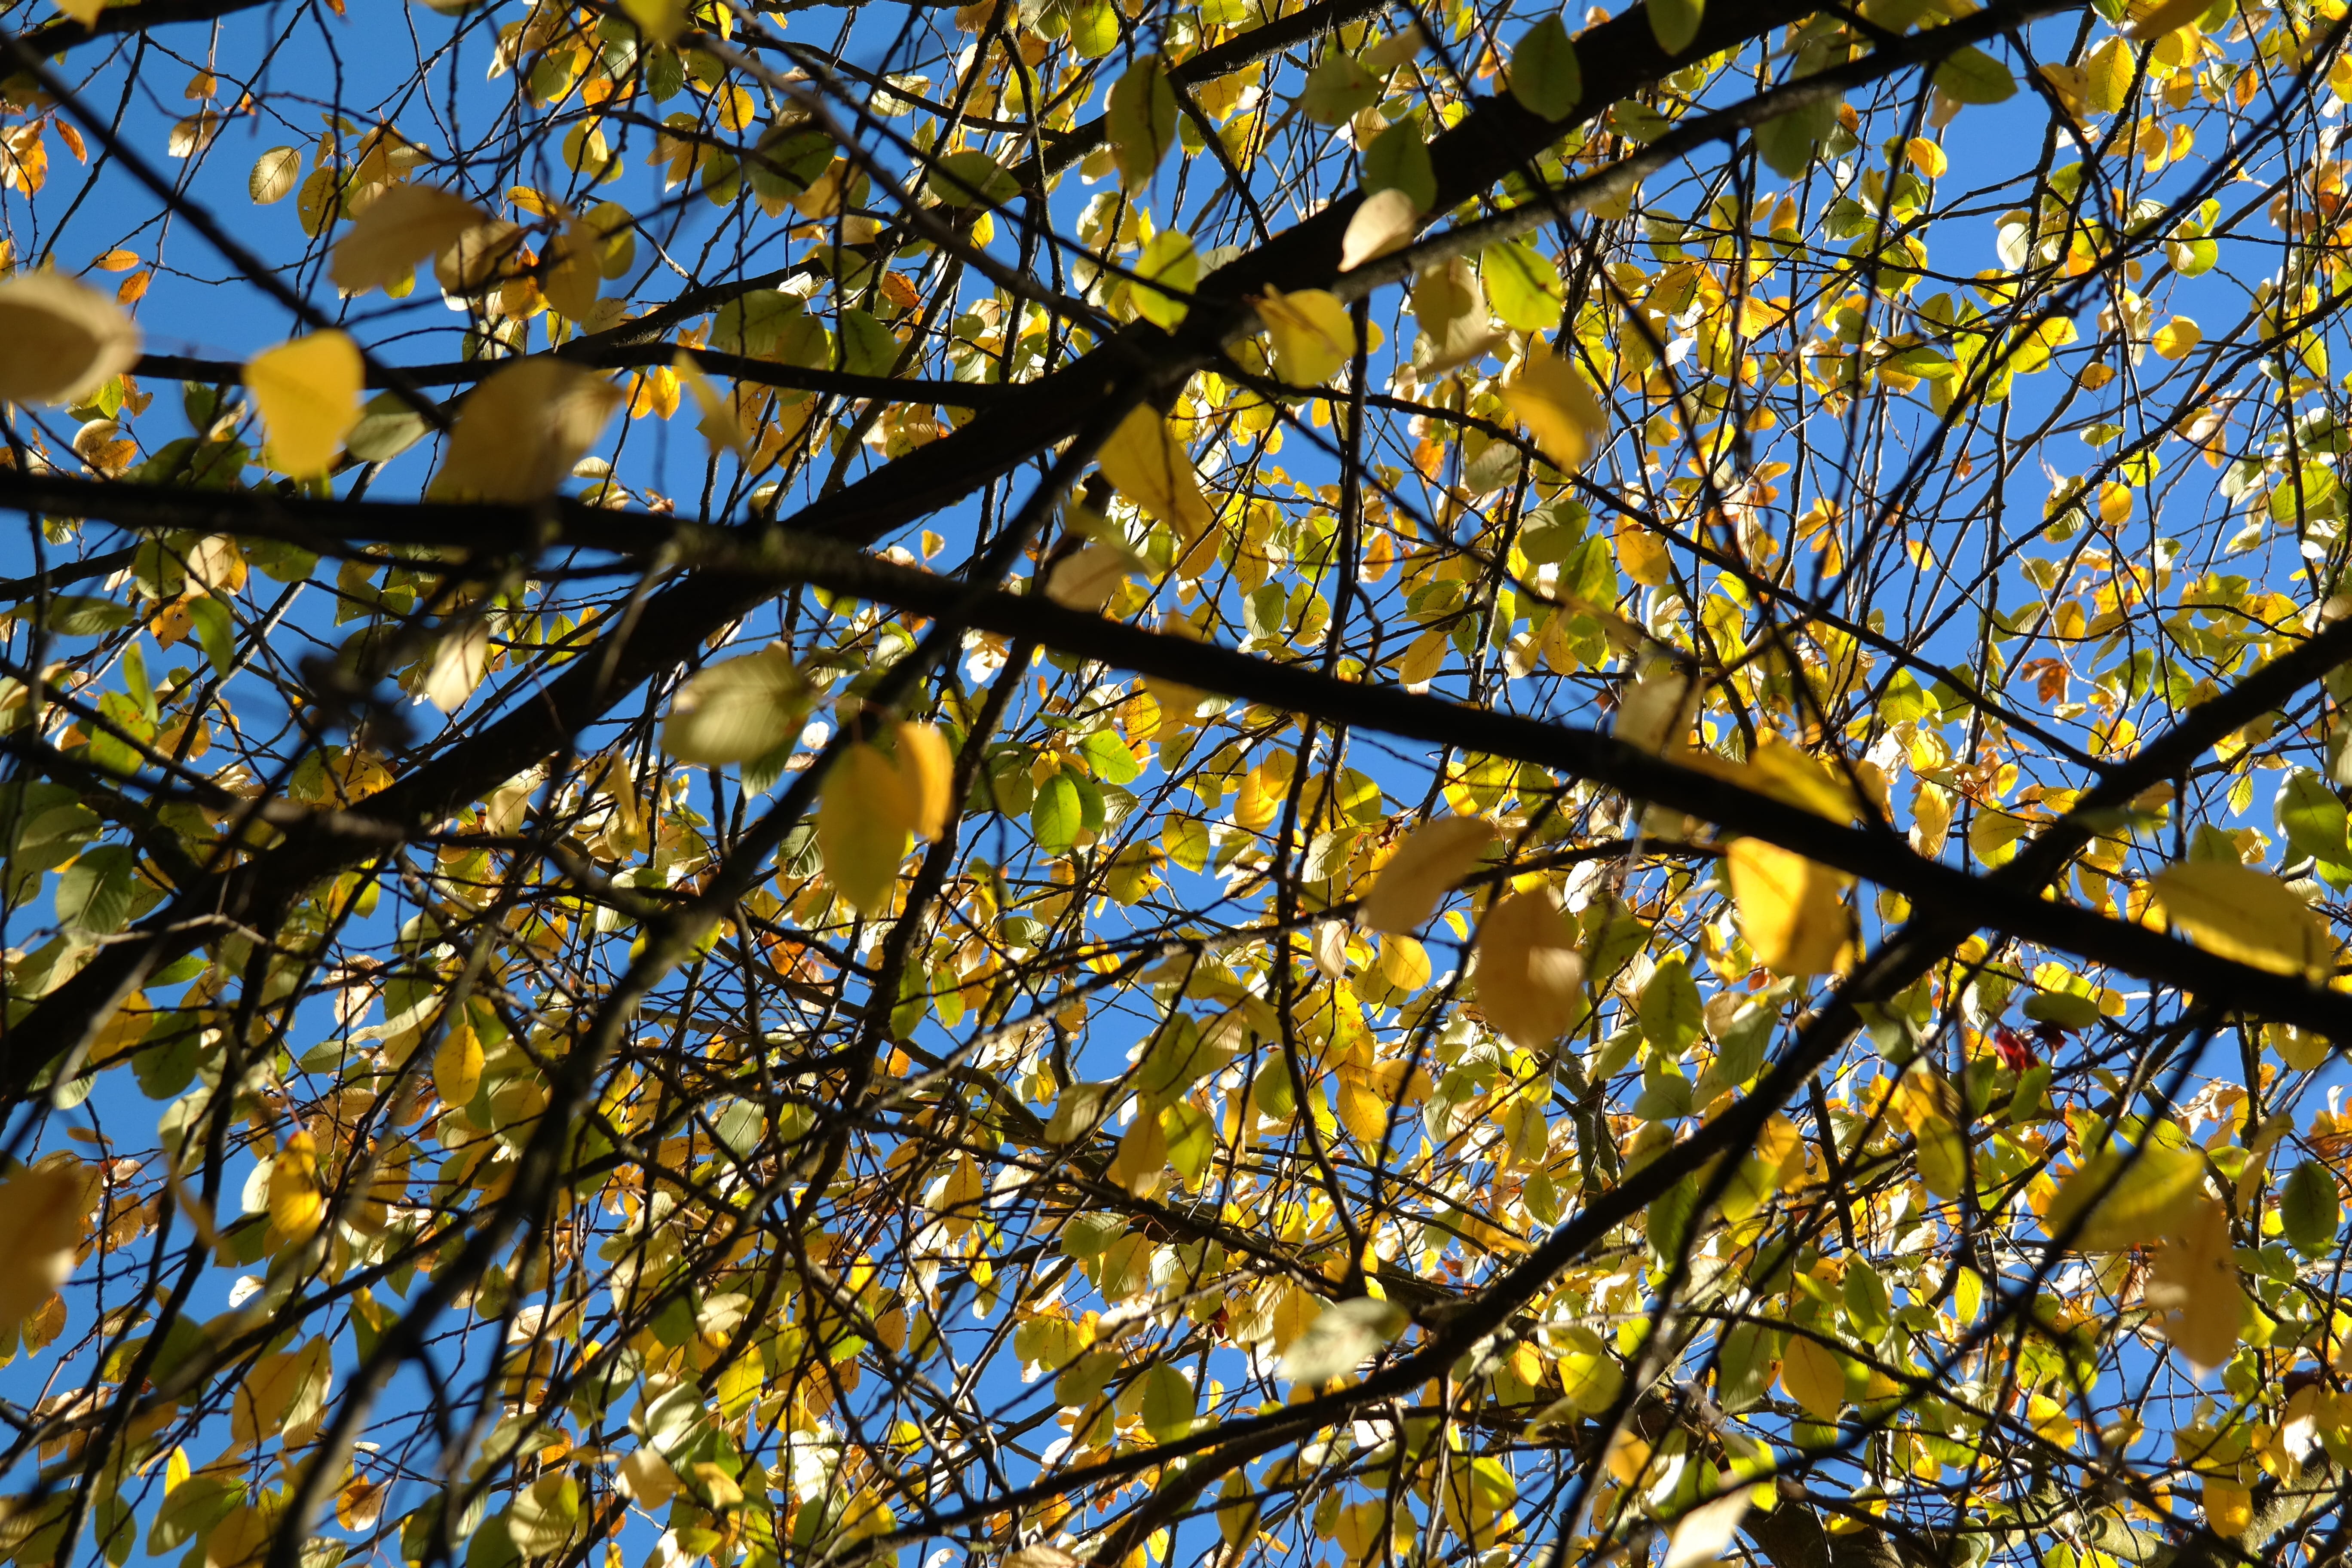 leaves, autumn, yellow, aesthetic, branches, bright yellow